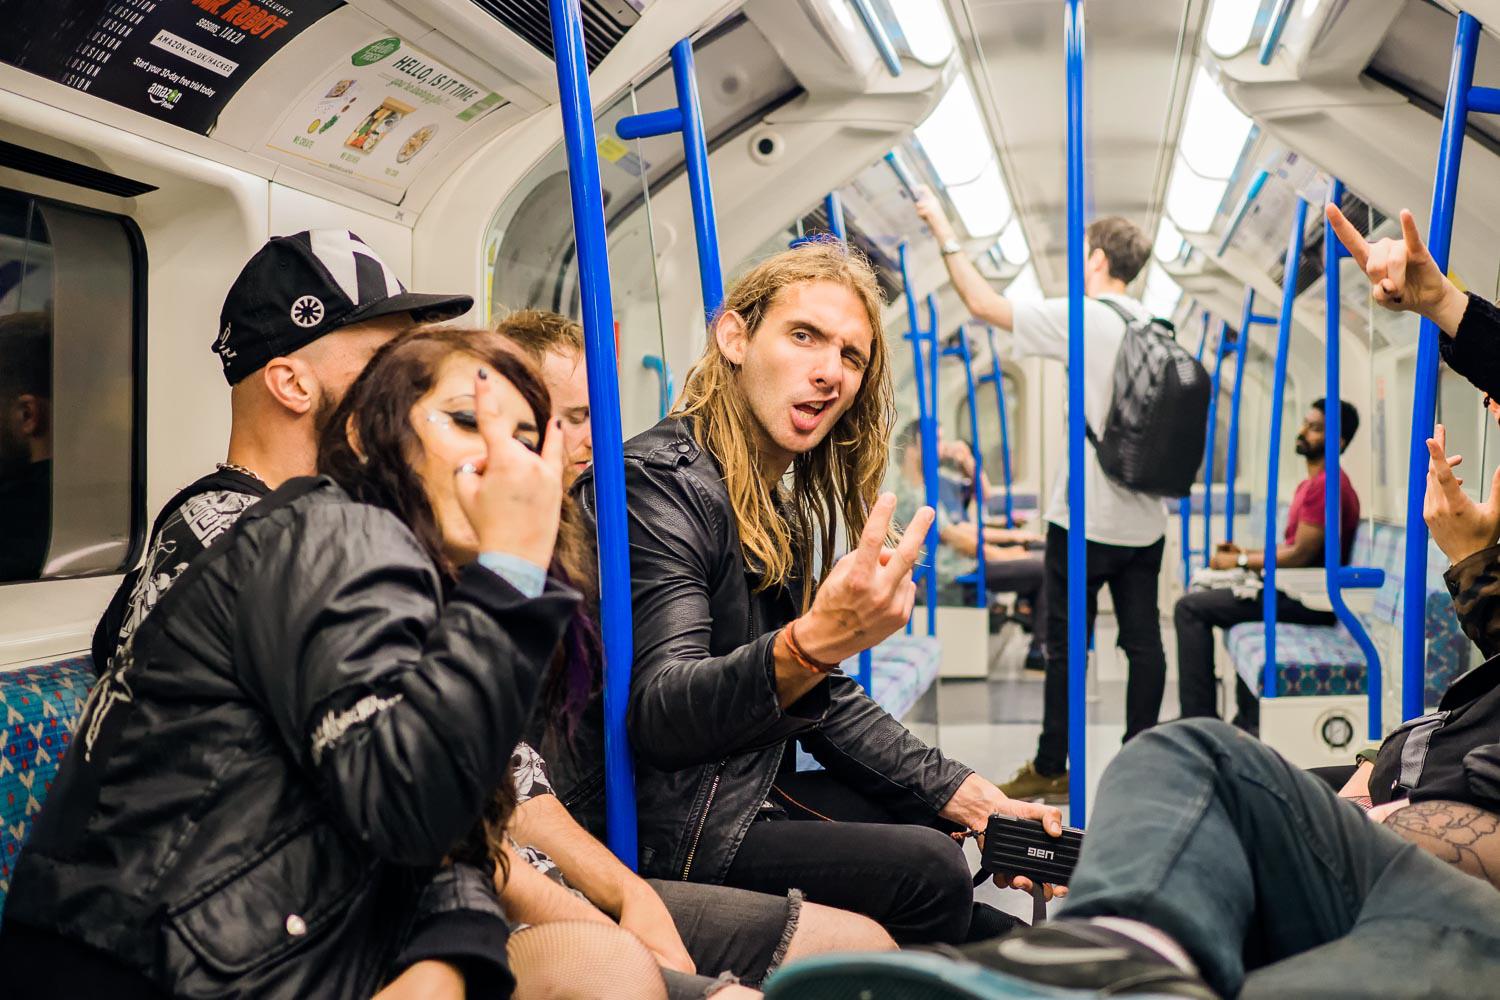 I approached this group of rowdy punks on the Victoria line train as it headed under the Thames toward north London. They were more than happy to act up toward the camera. They were on the way home after a big night out in south London. Drinking on the Tu